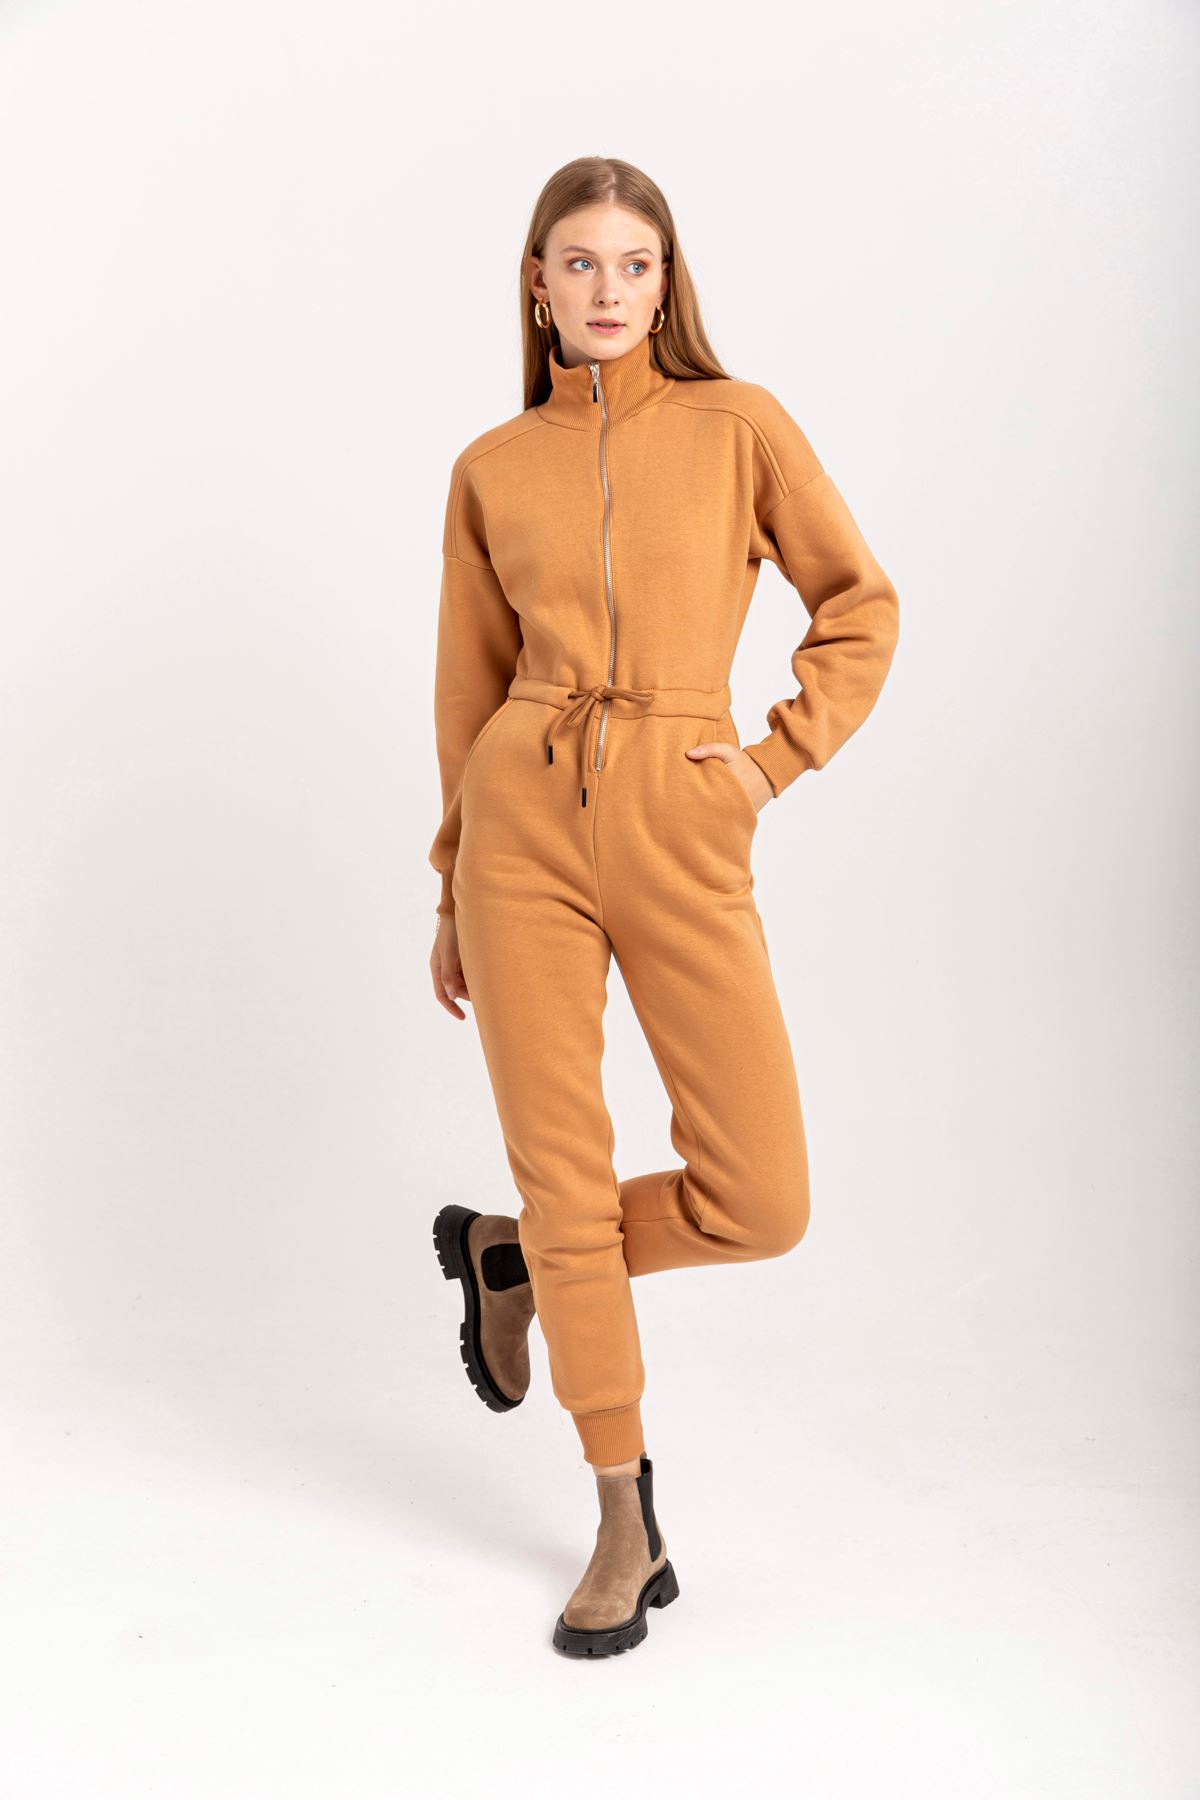 Third Knit Fabric Long Sleeve Roll Neck Tight Fit Zip Women Overalls - Light Brown